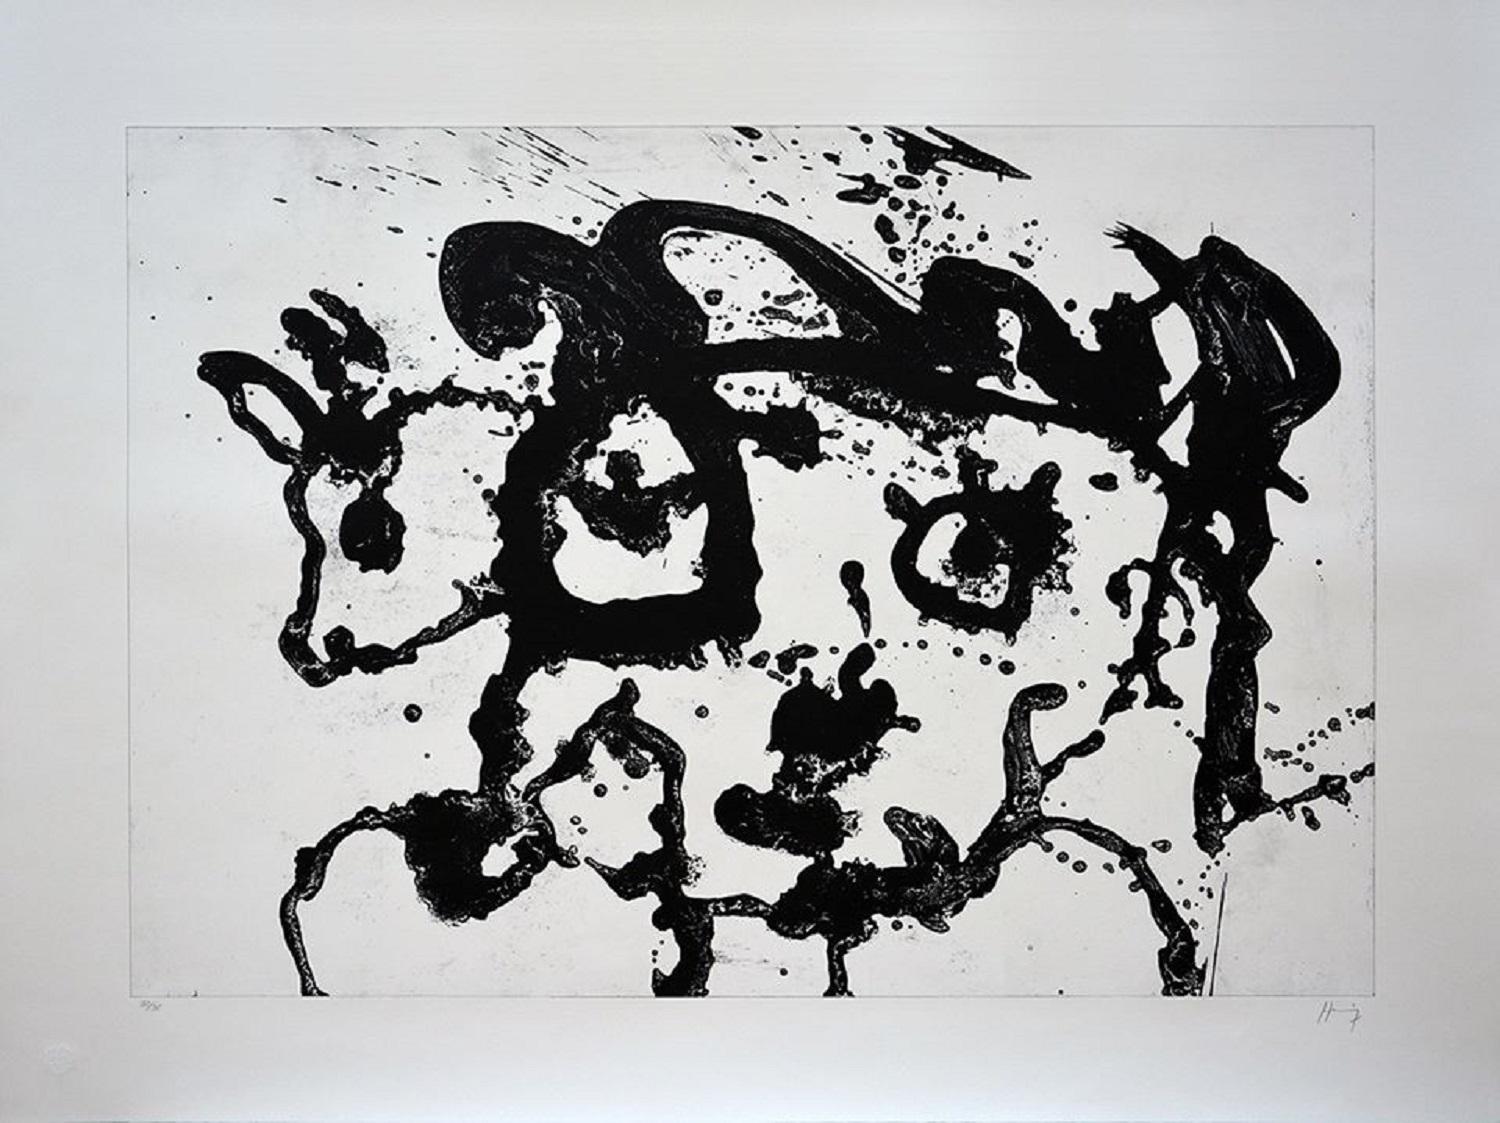 Sergio Hernández (Mexico, 1957)
'Observatorio I', 2016
lithography on zinc on paper Deponte 300 g.
35.4 x 47.2 in. (90 x 120 cm.)
Edition of 30
ID: HER-199
Unframed
























